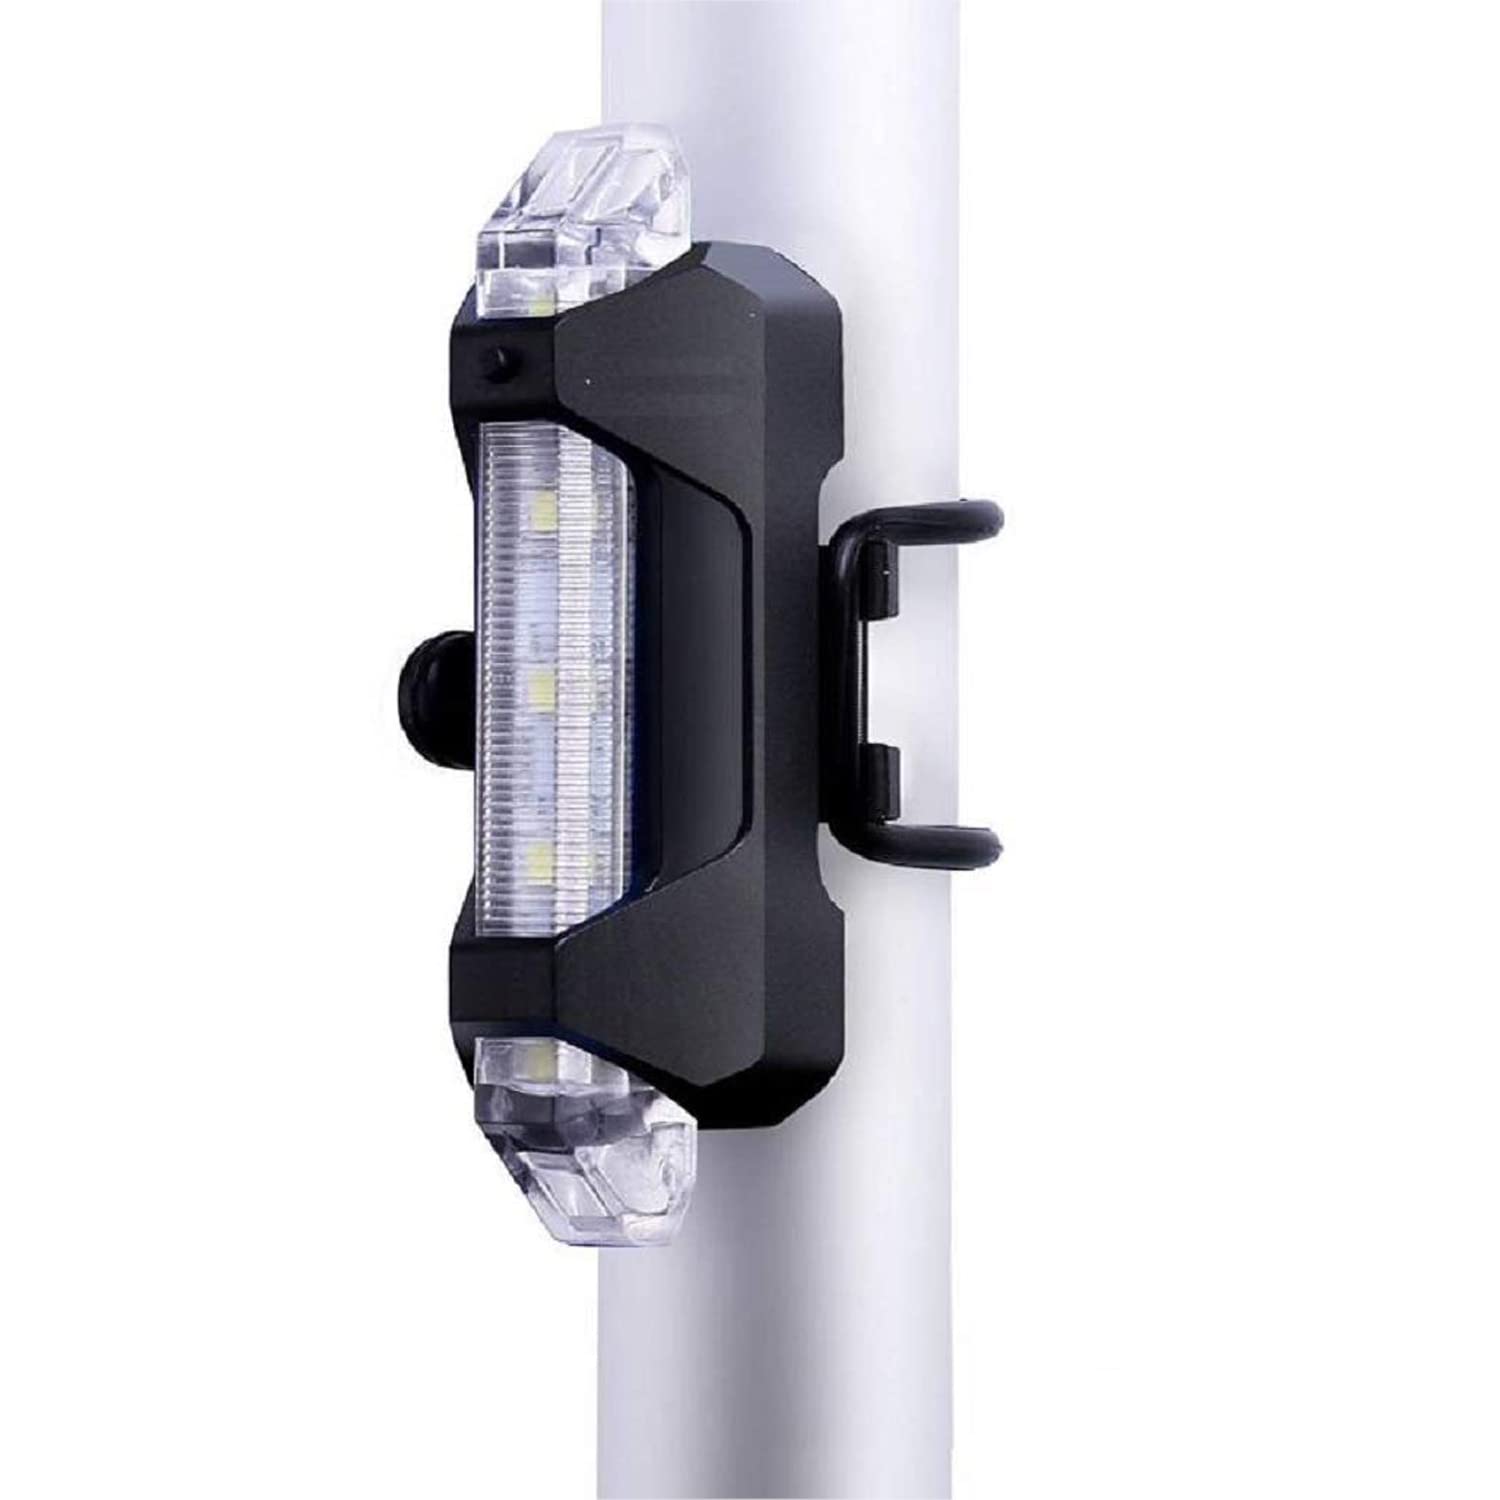 Strauss Bicycle USB Rechargeable 5 LED Tail Light, (White)